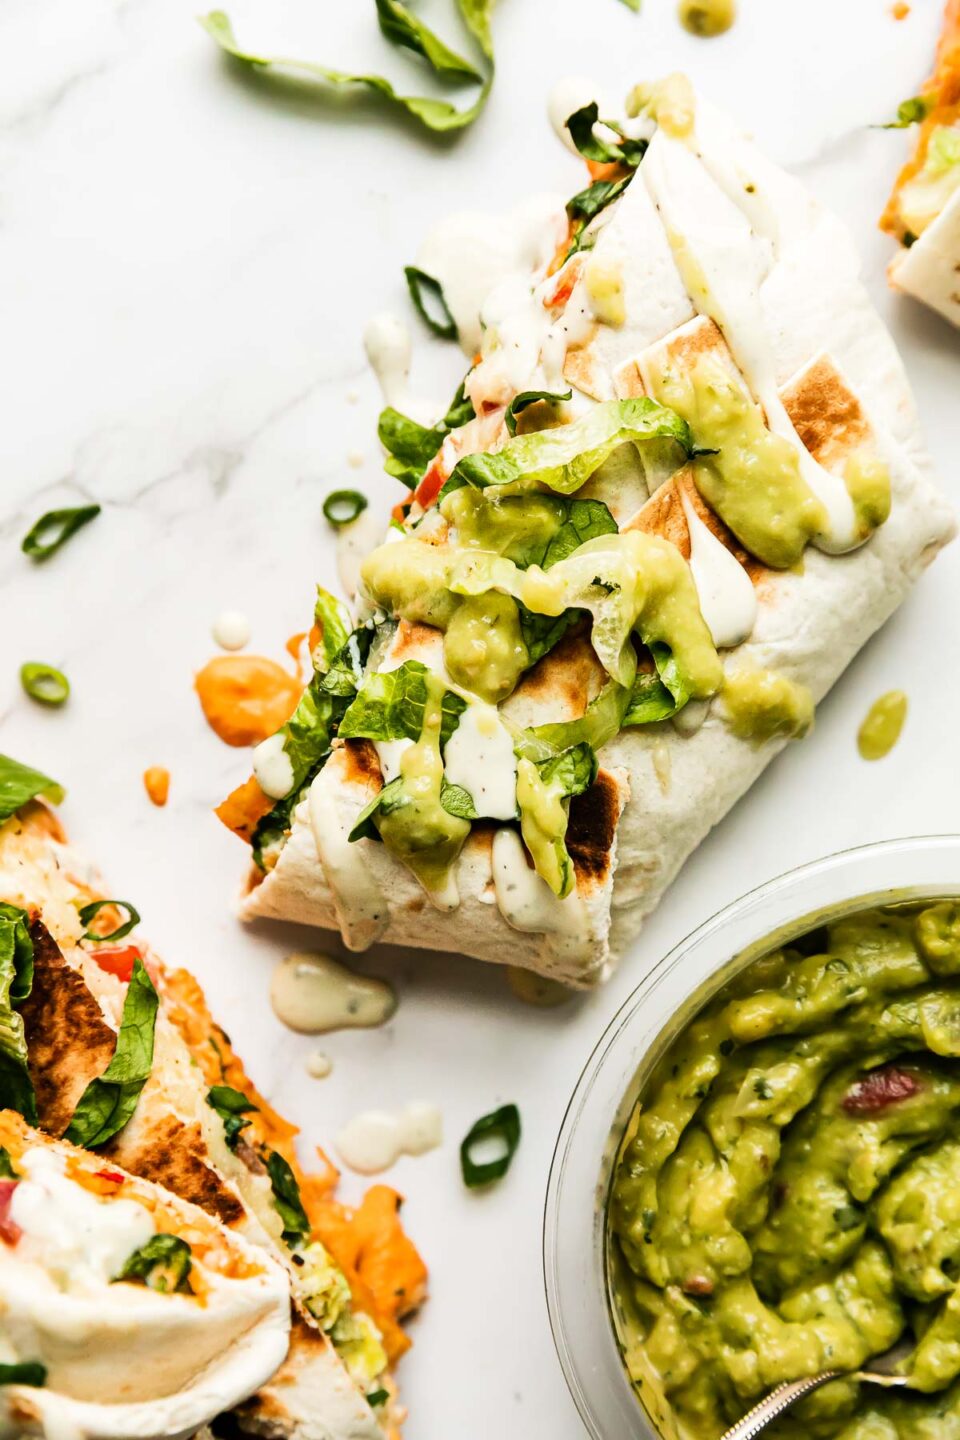 Four buffalo chicken crunchwraps are arranged atop a white and gray marble surface. An open container of Good Foods Chunky Guacamole rests alongside the crunchwraps. A spoon rests inside of the Good Foods Chunky Guacamole. The buffalo chicken crunchwrap halve at center is topped with drizzles of ranch dressing, Good Foods Avocado Salsa, and shredded lettuce.